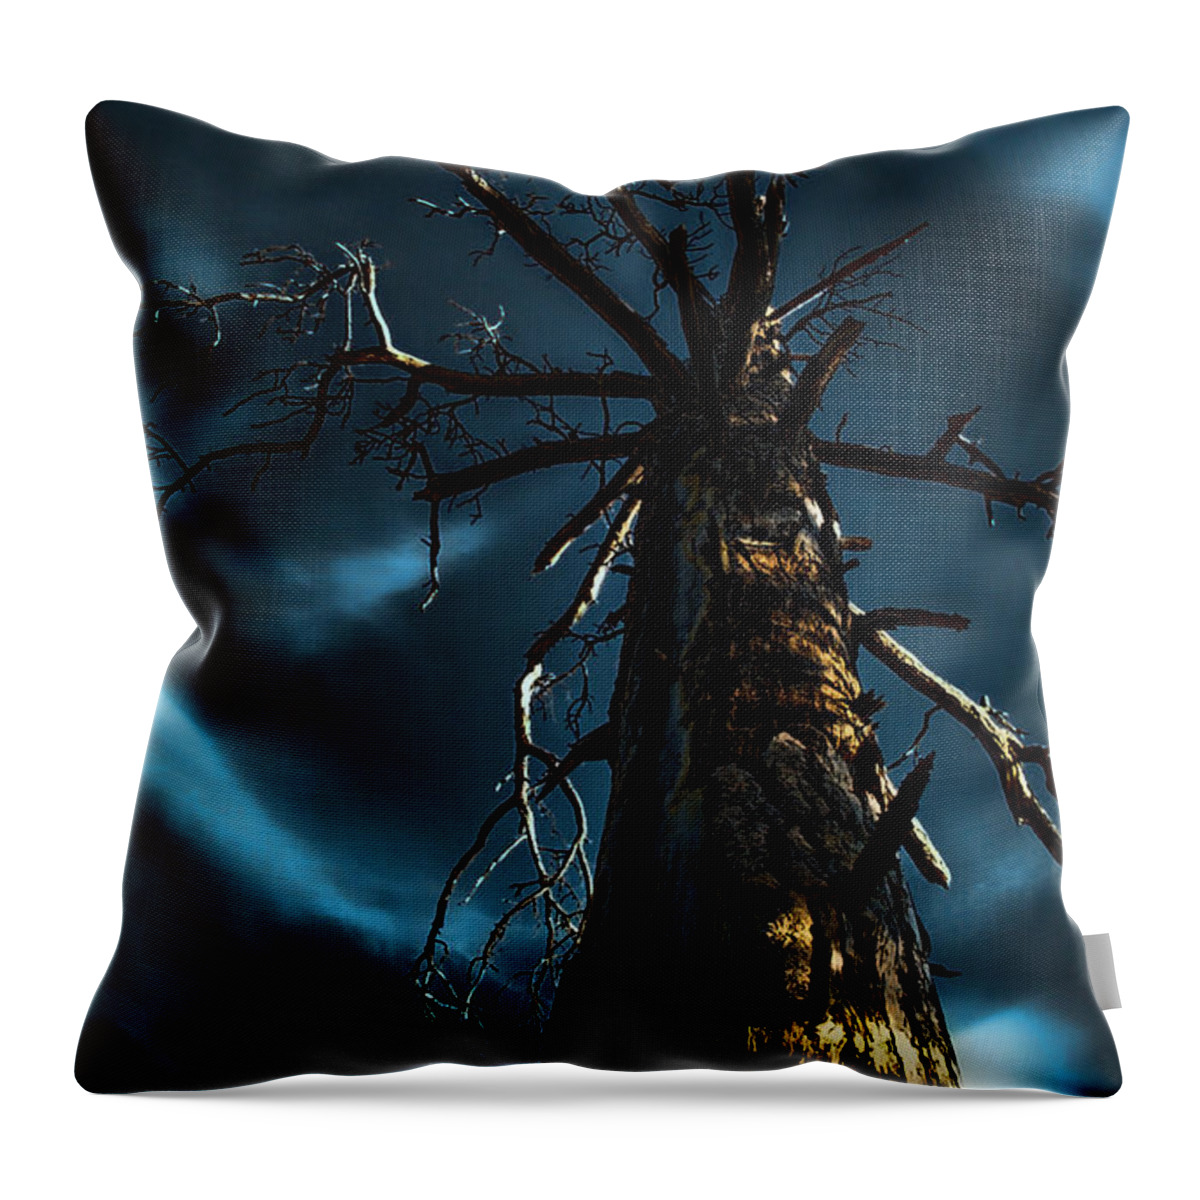 Tall Tree Throw Pillow featuring the photograph Up a Tree by Bonnie Bruno